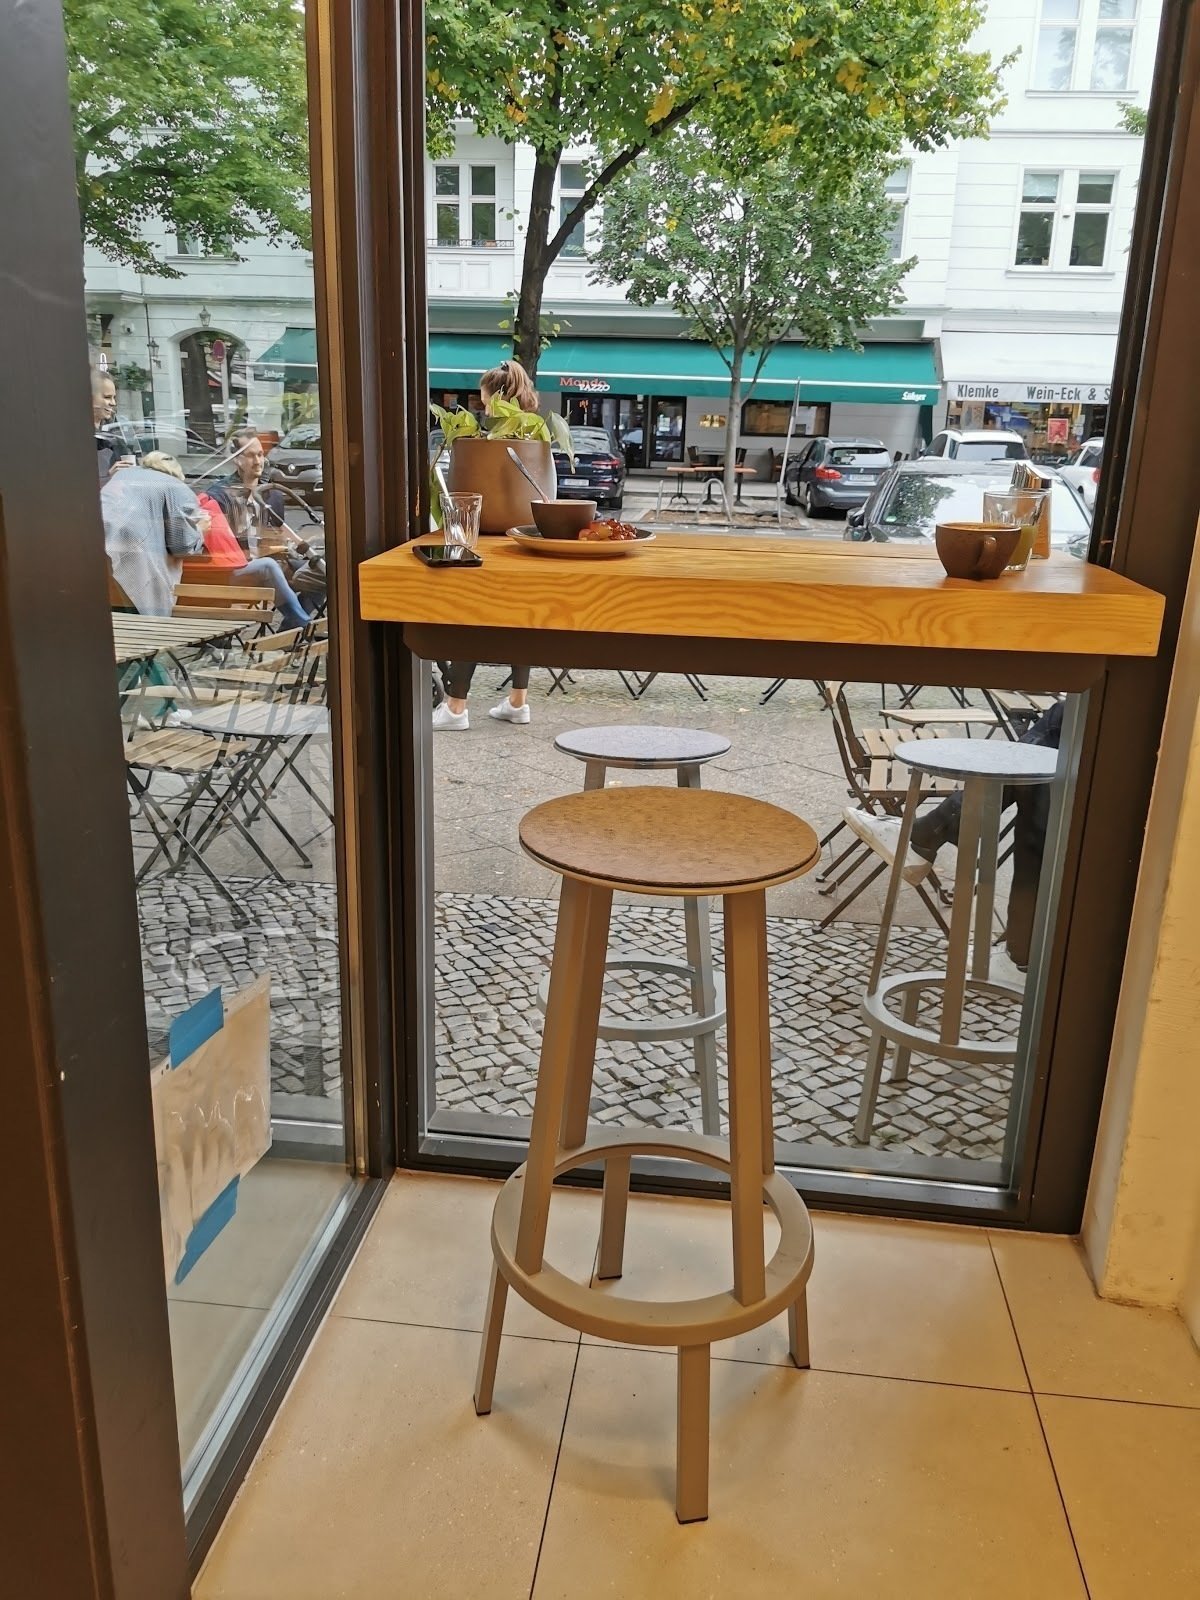 <span class="translation_missing" title="translation missing: en.meta.location_title, location_name: Private View Coffee, city: Berlin">Location Title</span>